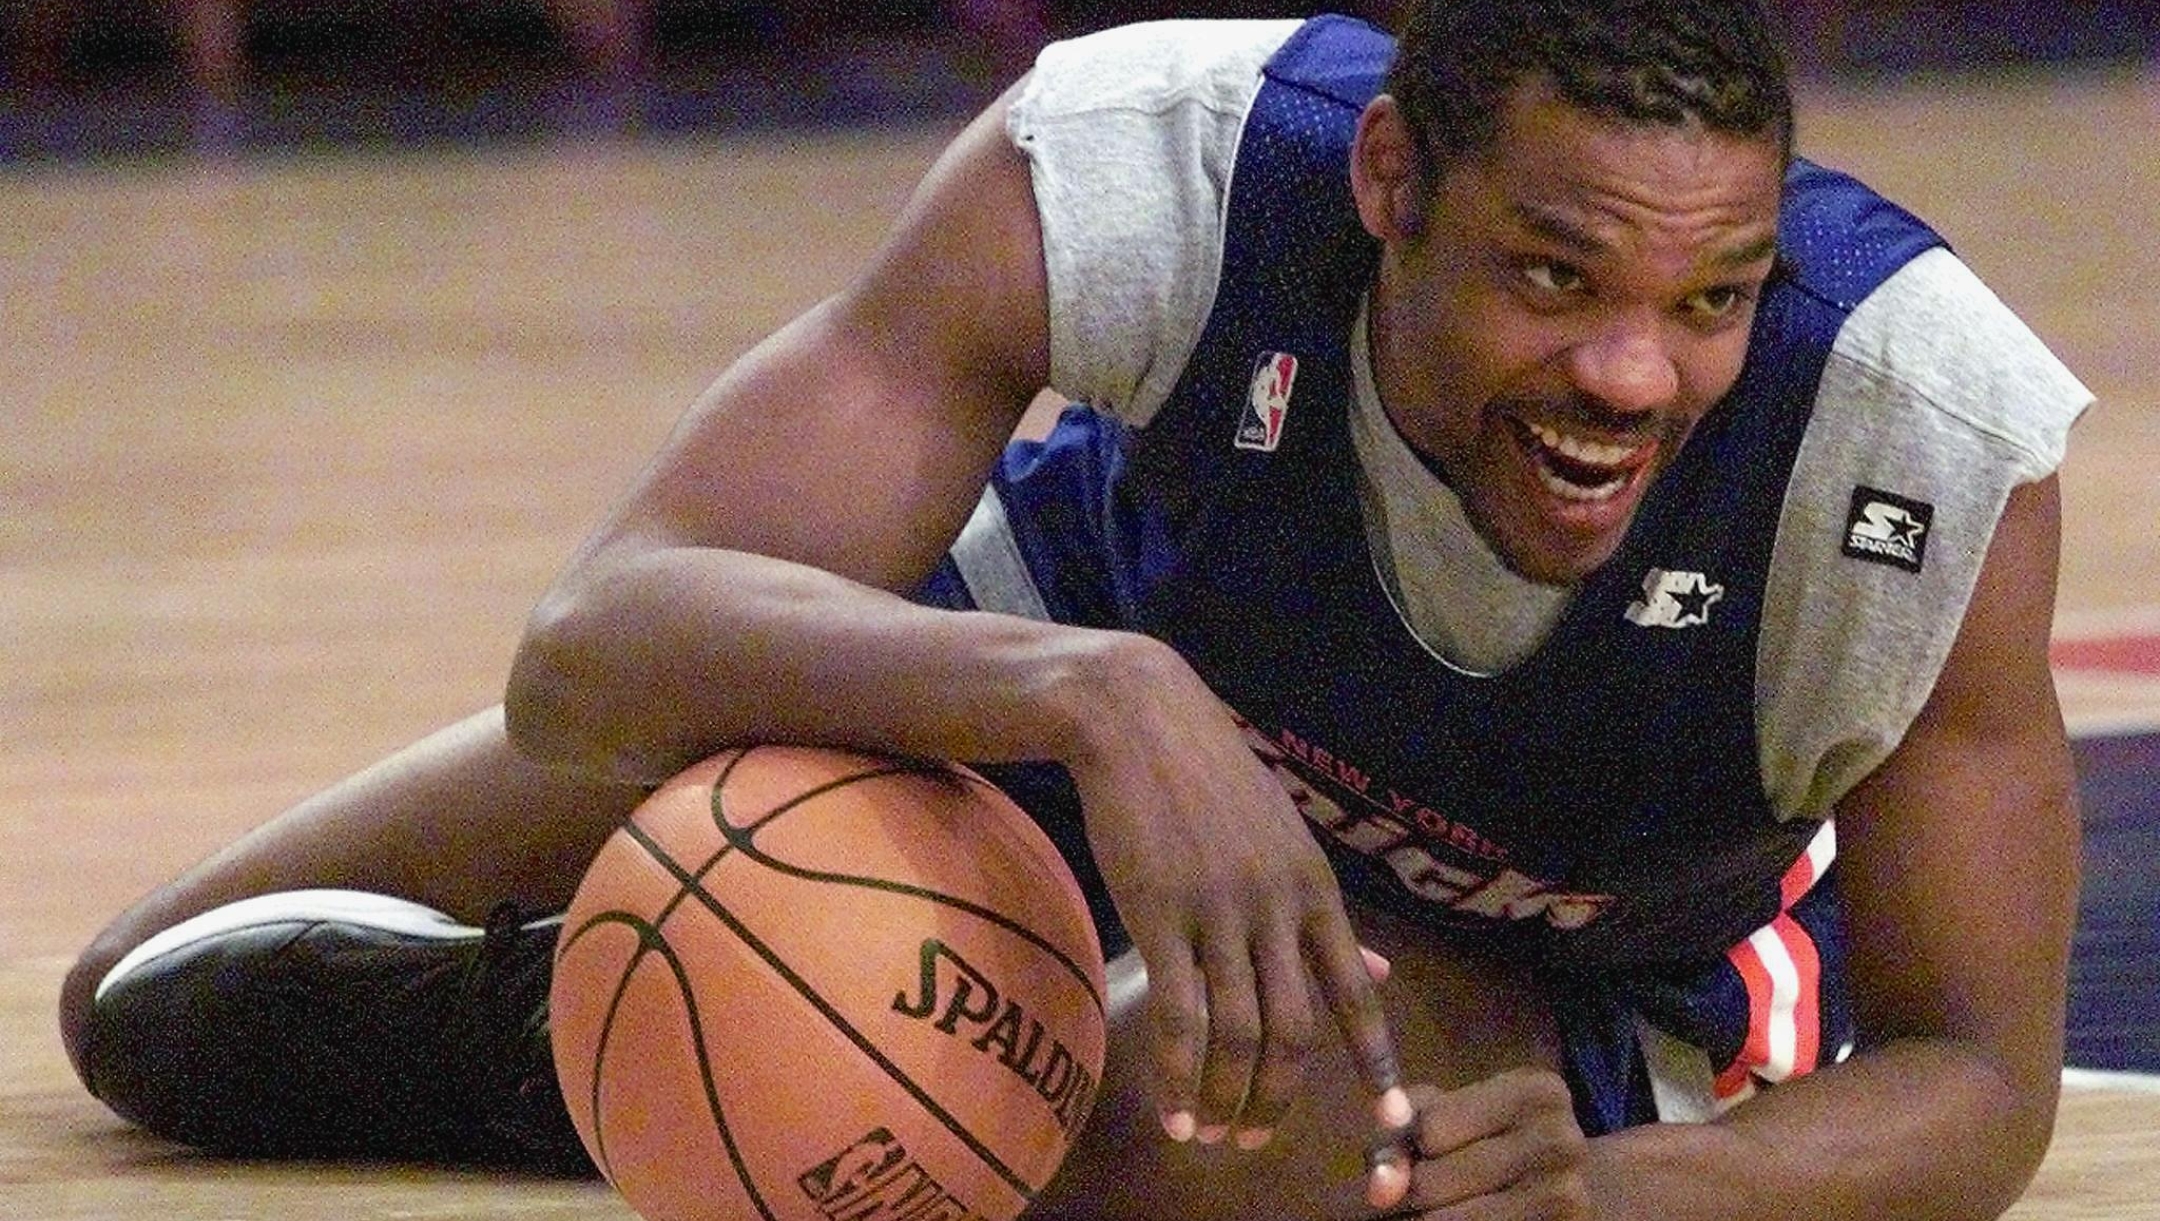 Latrell Sprewell of the New York Knicks laughs with teammates 22 June, 1999, during practice at Madison Square Garden in New York. Sprewell and the Knicks trail the San Antonio Spurs one game to two in the best-of-seven NBA finals. (ELECTRONIC IMAGE) AFP PHOTO/Jeff HAYNES (Photo by JEFF HAYNES / AFP)